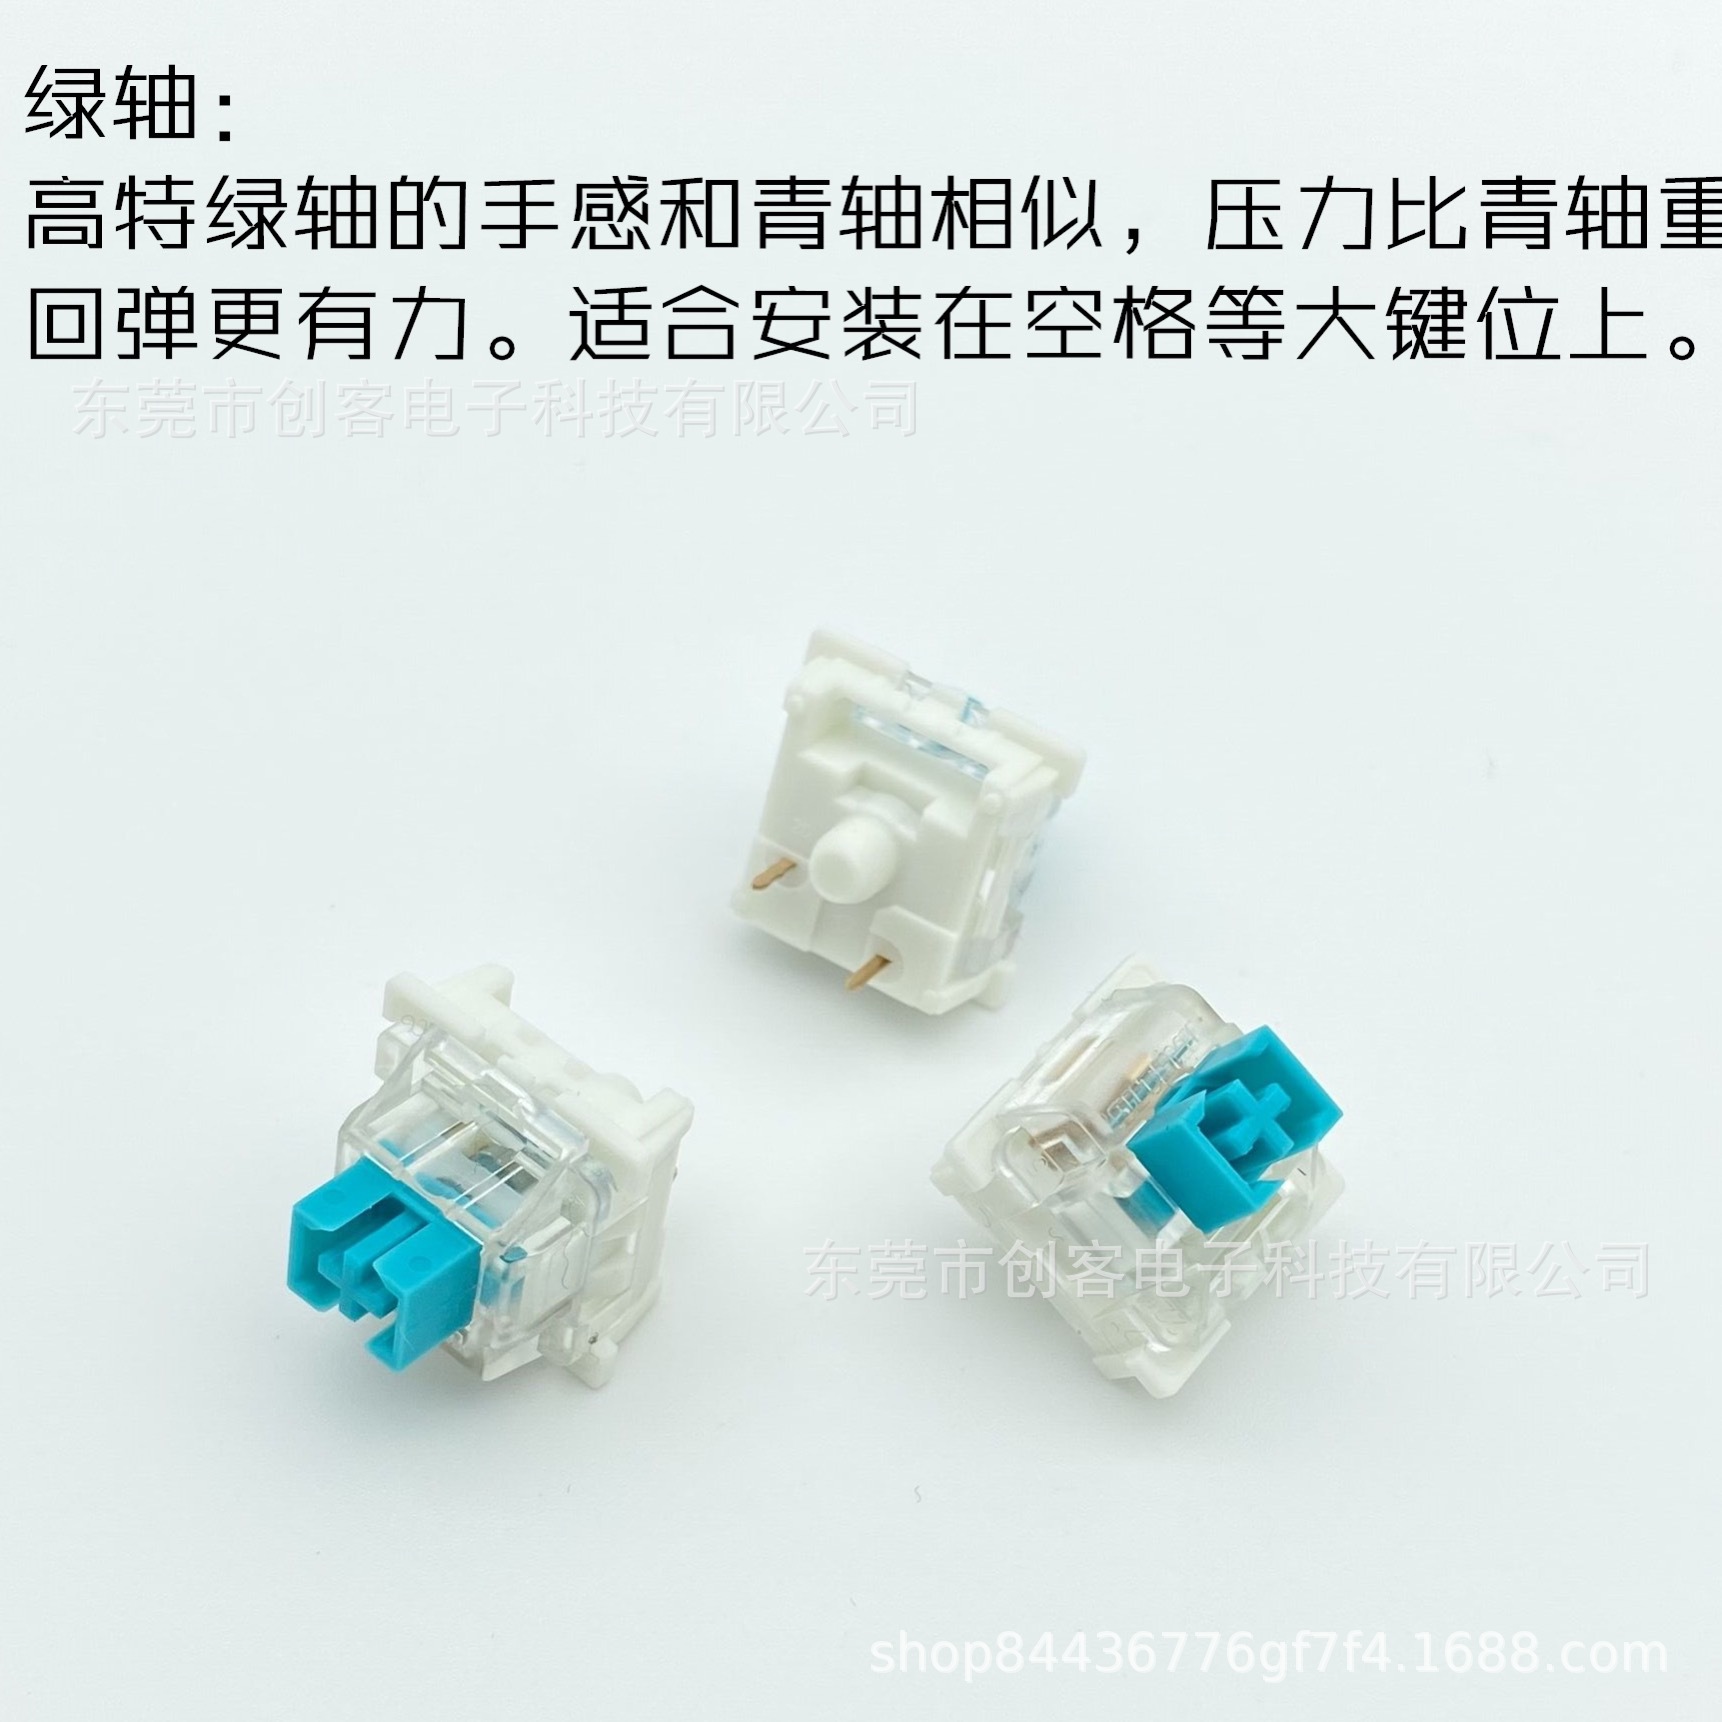 Gaotoutemu Mechanical Keyboard Switch Shaft Body Diy Customized Green Axis Black Axis Red Axis Tea Axis Mute Axis